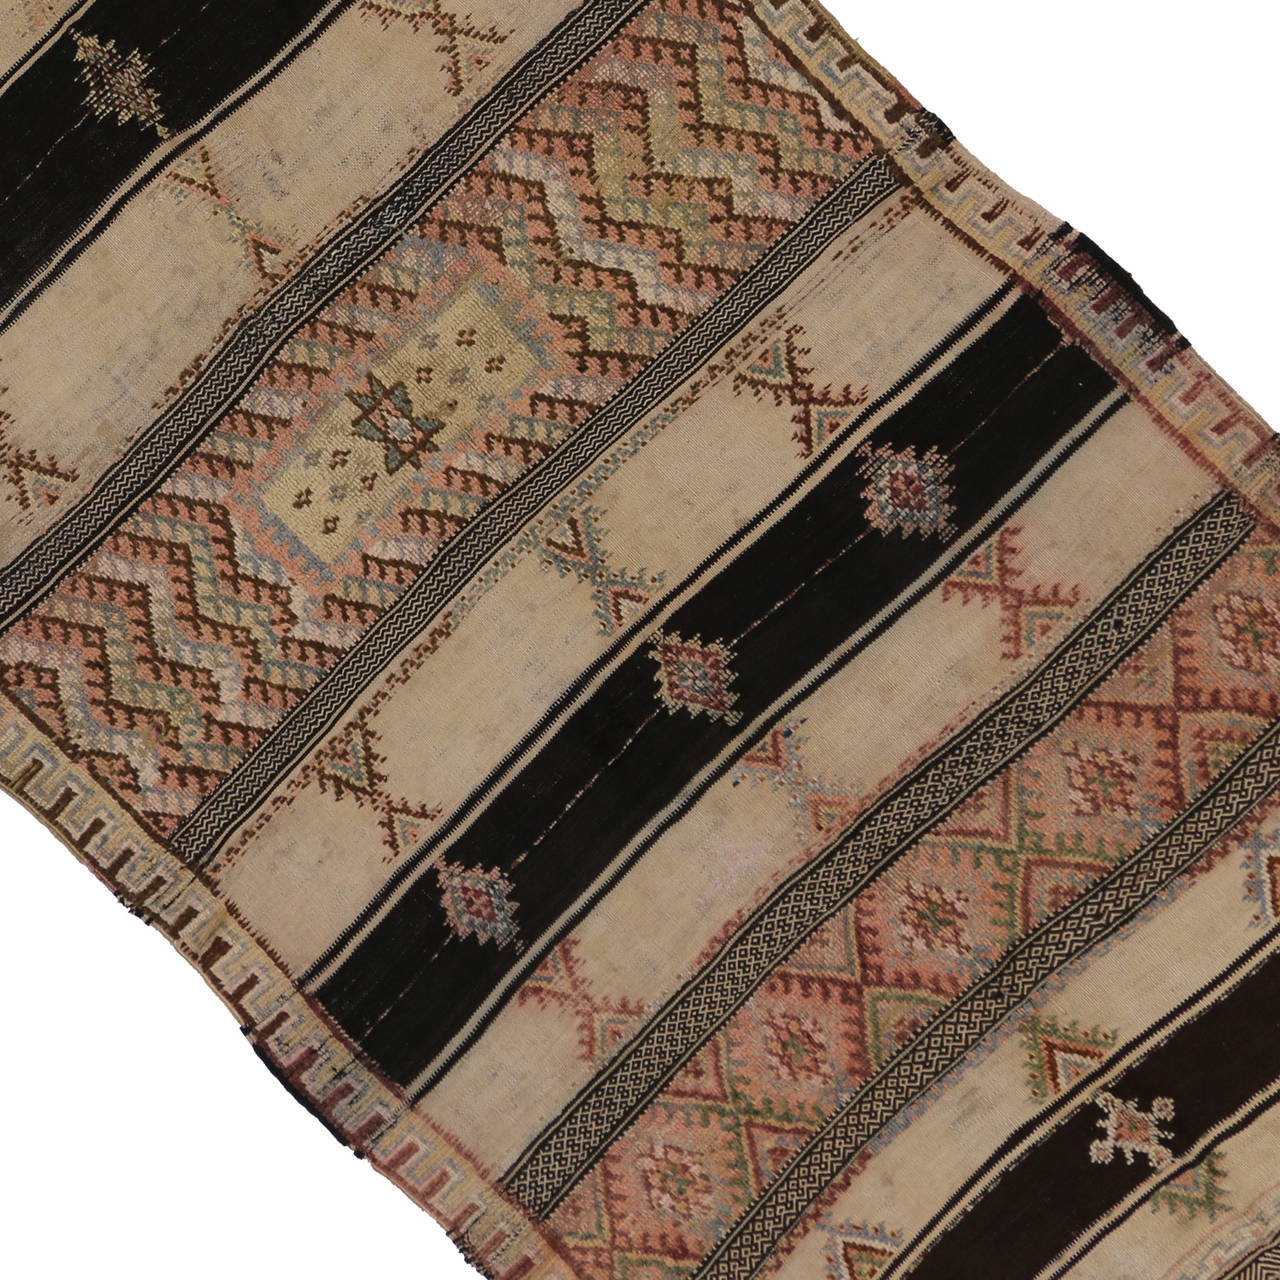 Hand-Knotted Antique Moroccan Kilim and Pile Rug with Tribal Symbols and Modern Design